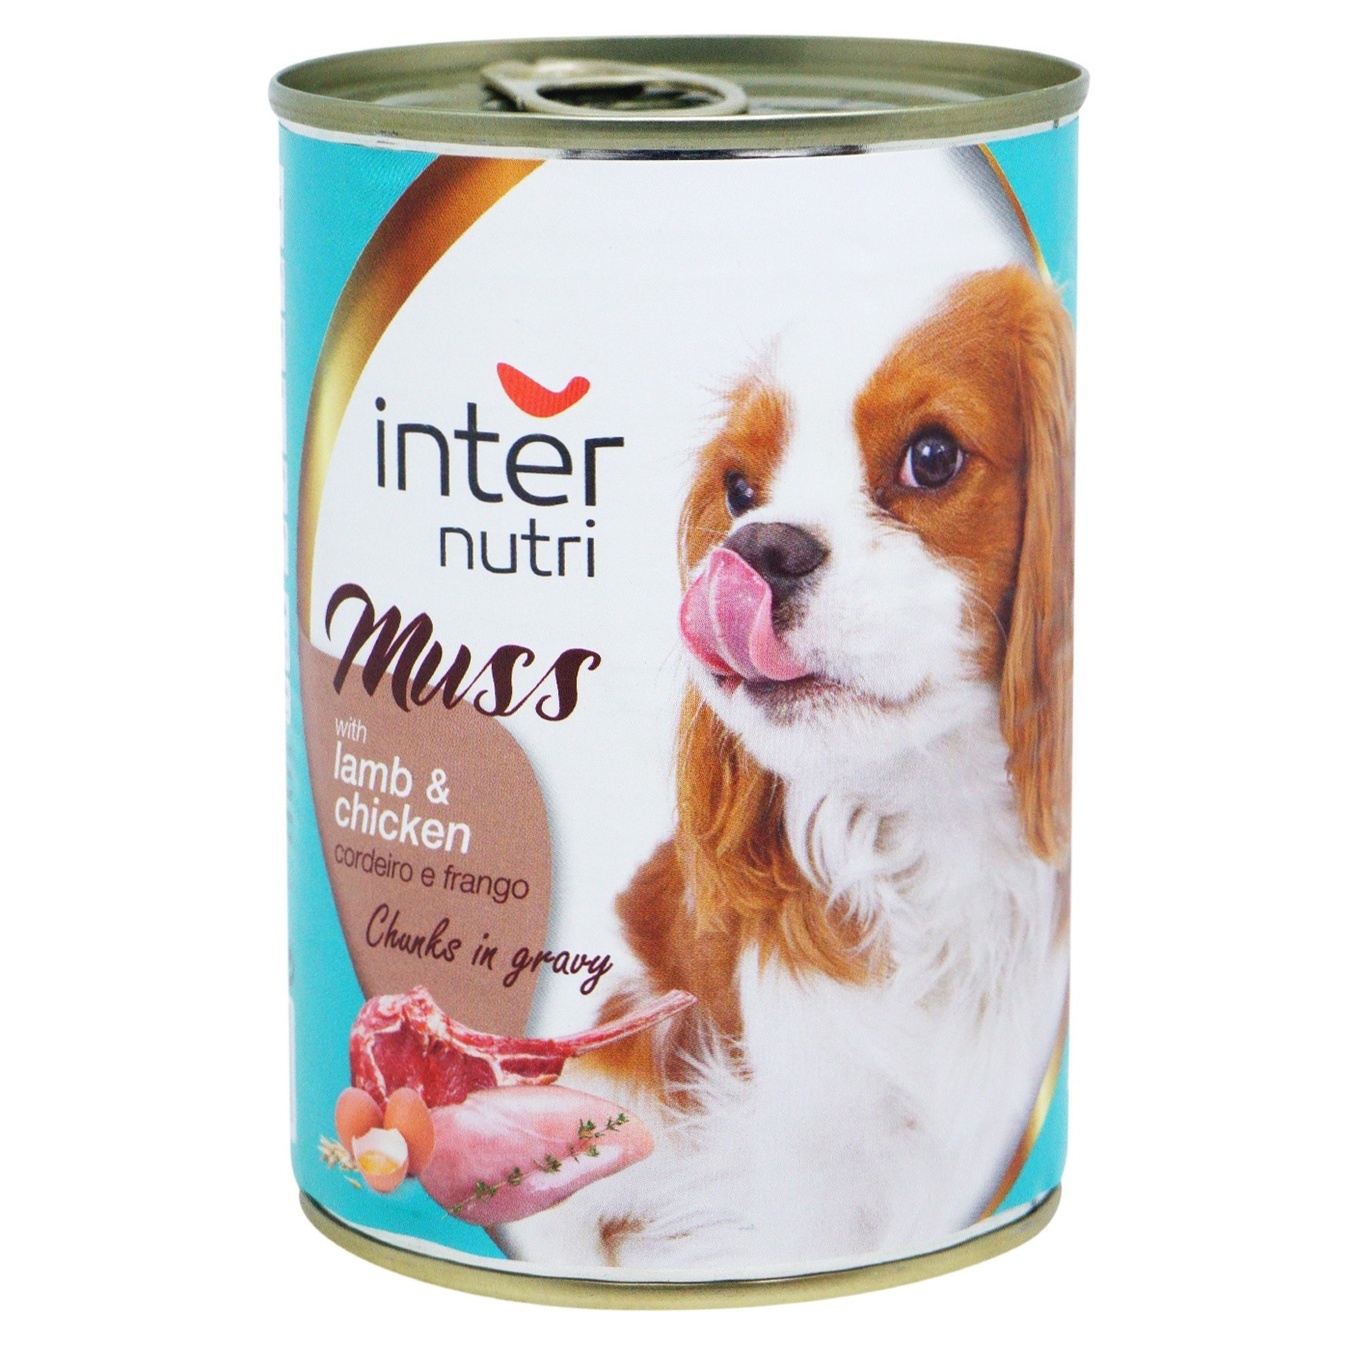 Canned food Internutri Muss lamb and chicken for dogs 415g